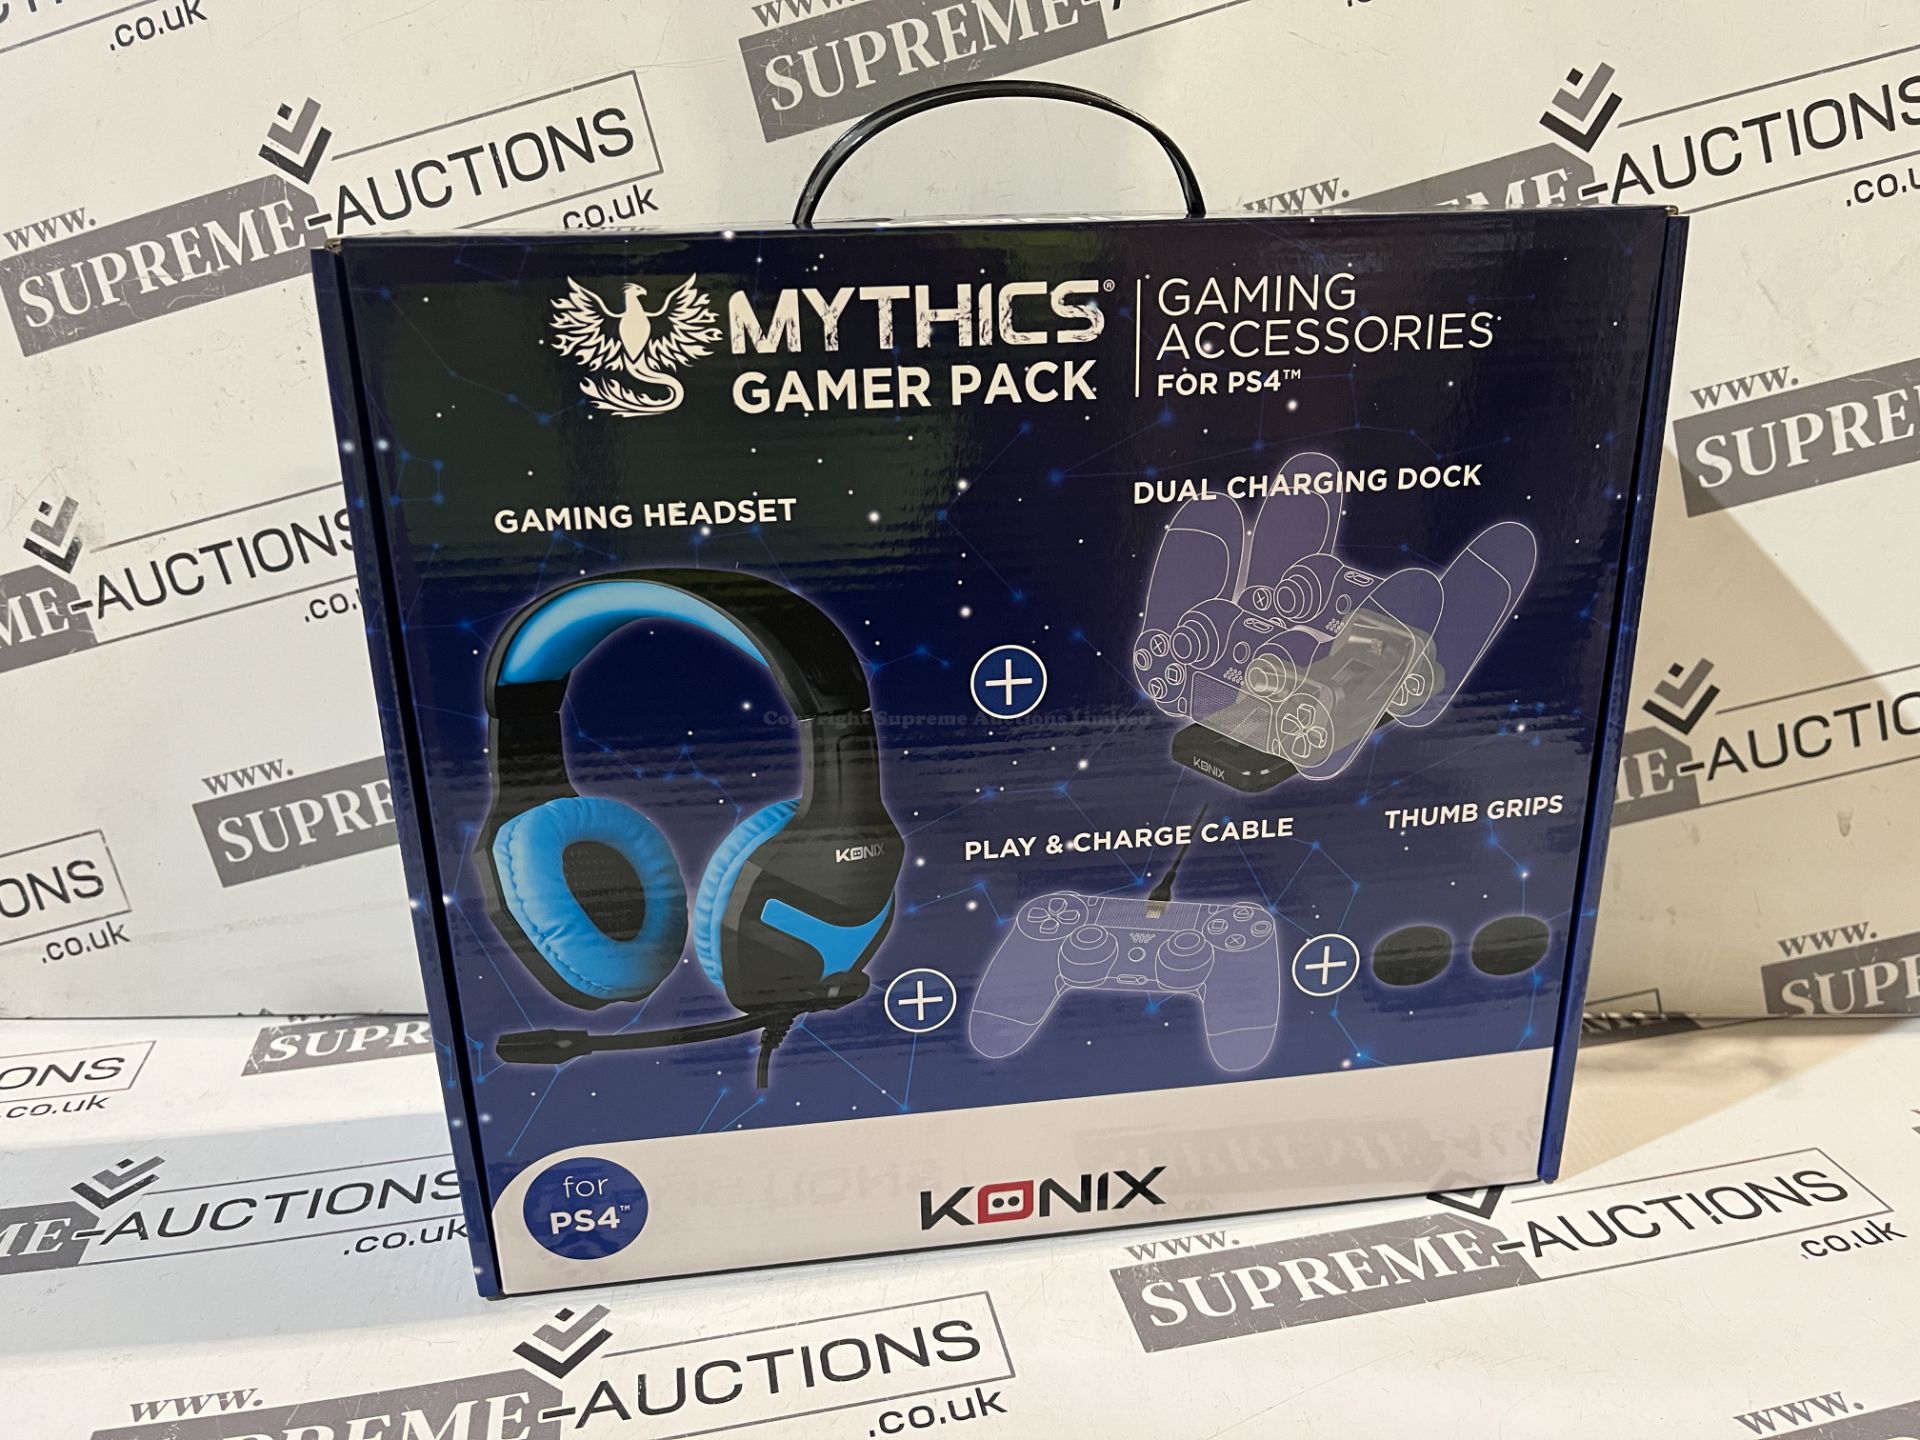 12x BRAND NEW KONIX MYTHICS GAMER PACK INCLUDING HEADSET, CHARGING DOCK, CABLE, THUMB GRIPS. (R15-